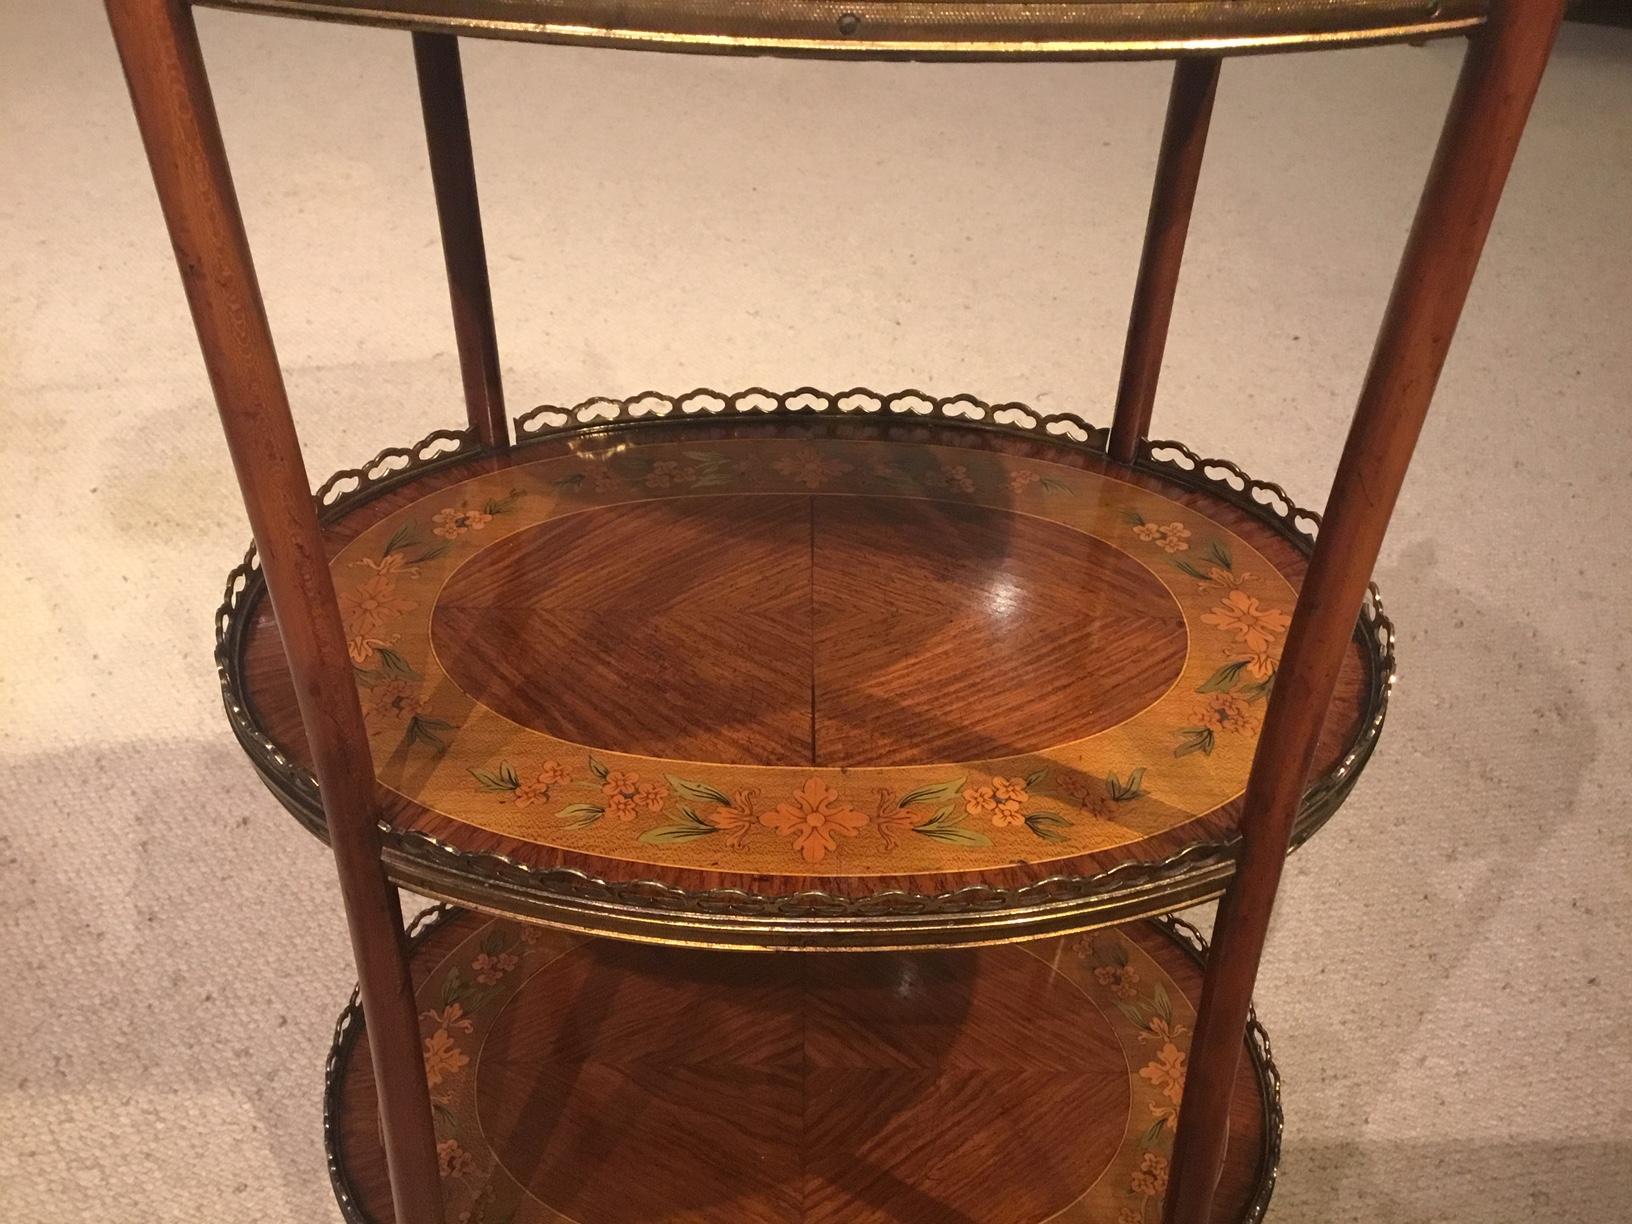 Edwardian Period Kingwood, Sycamore and Marquetry Inlaid Étagère For Sale 4